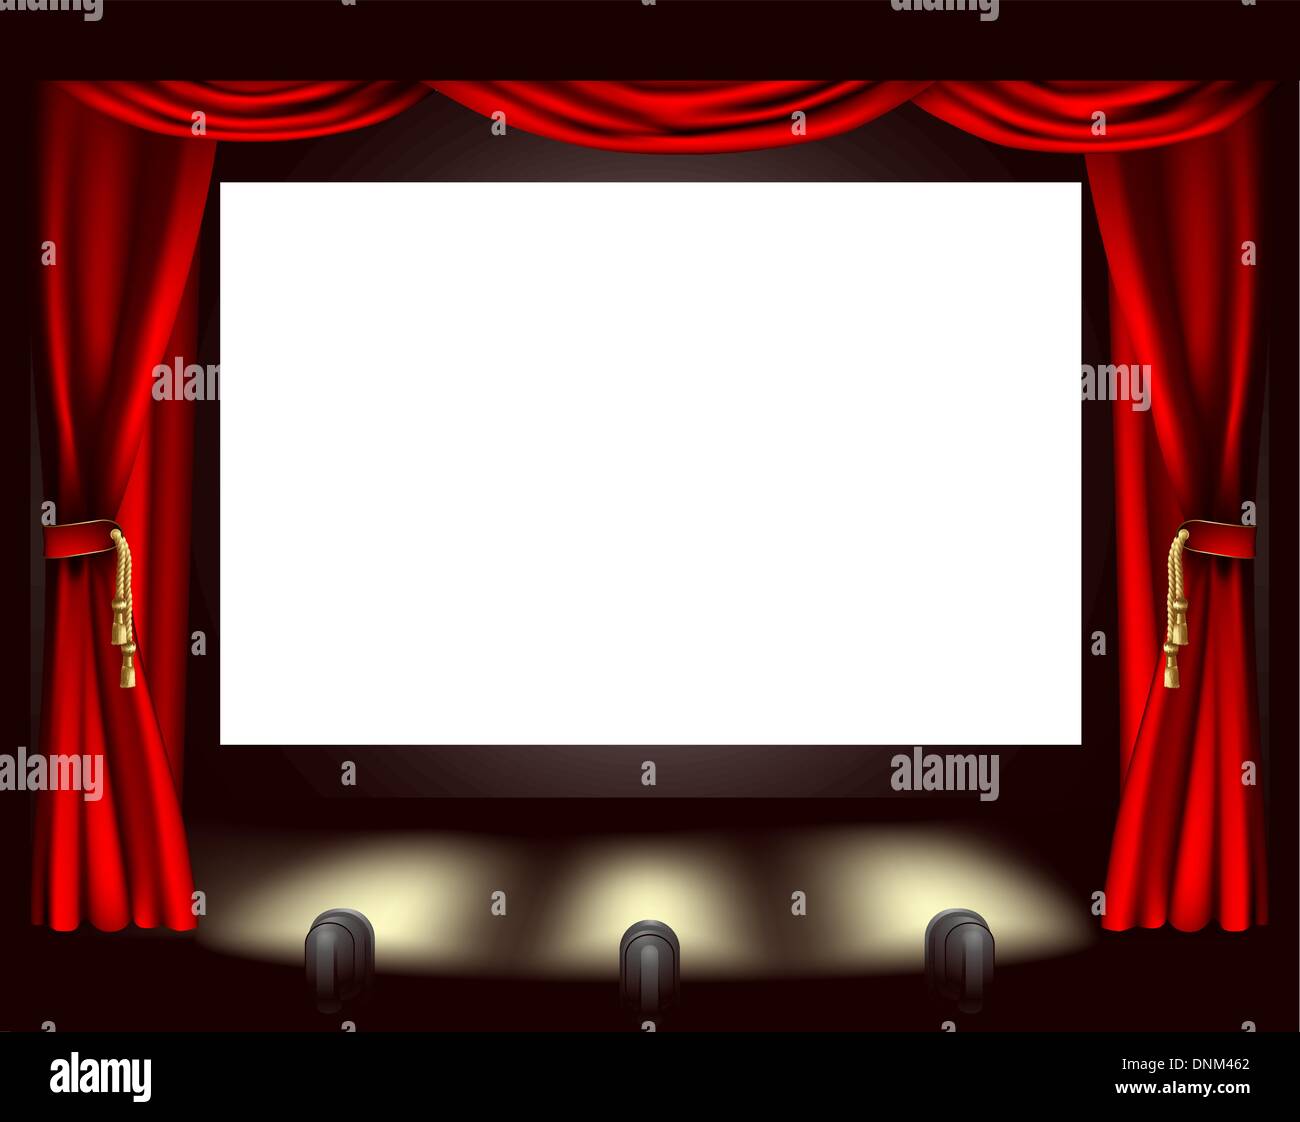 Illustration of cinema screen, lights and curtain Stock Vector